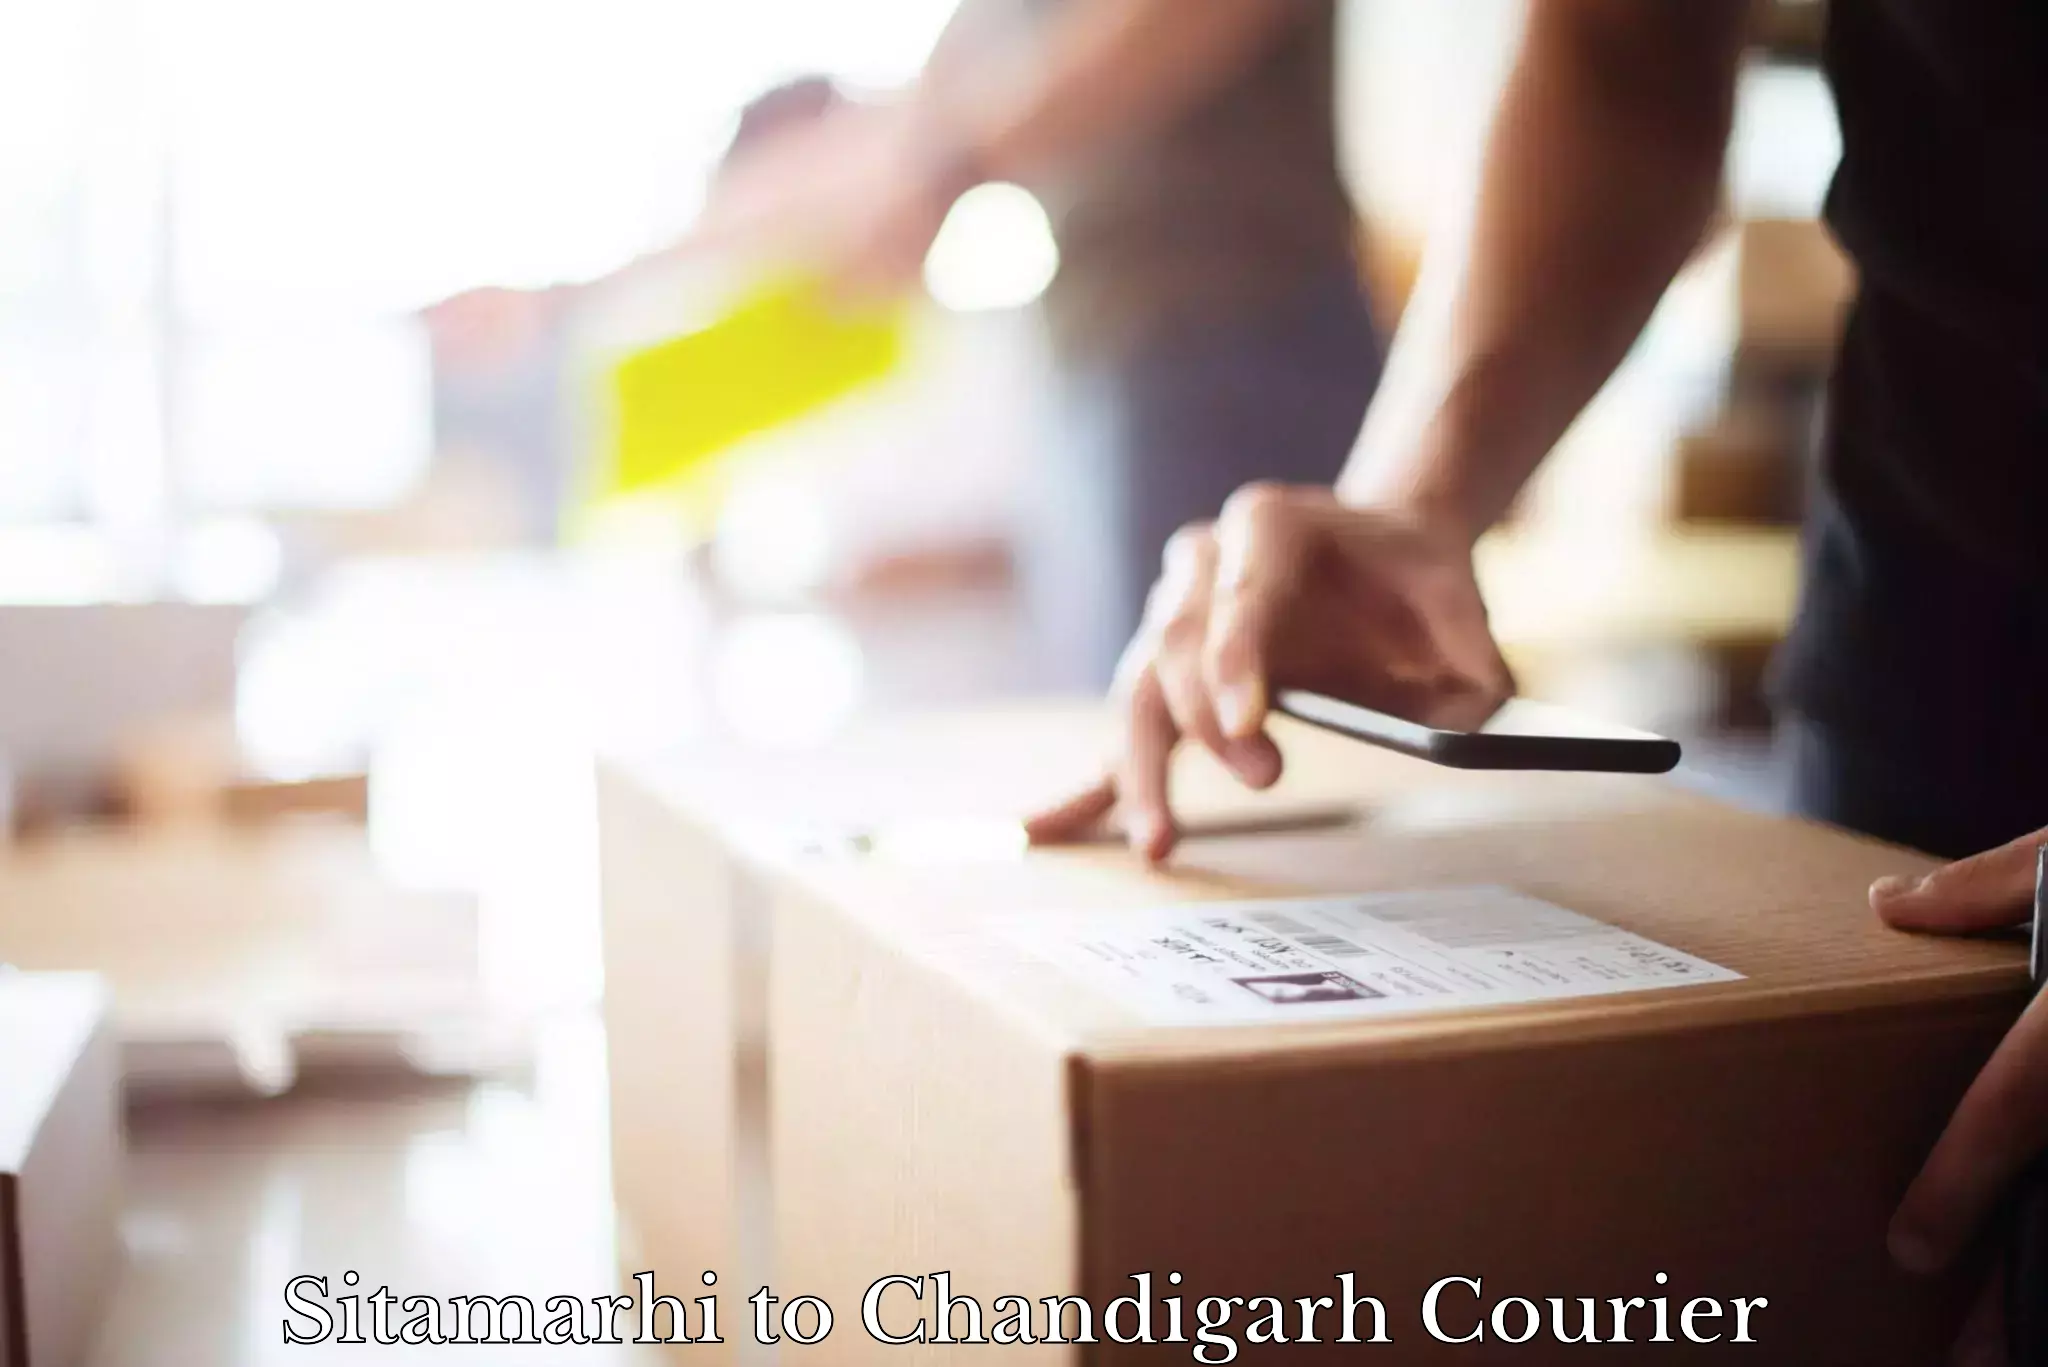 Parcel service for businesses Sitamarhi to Chandigarh